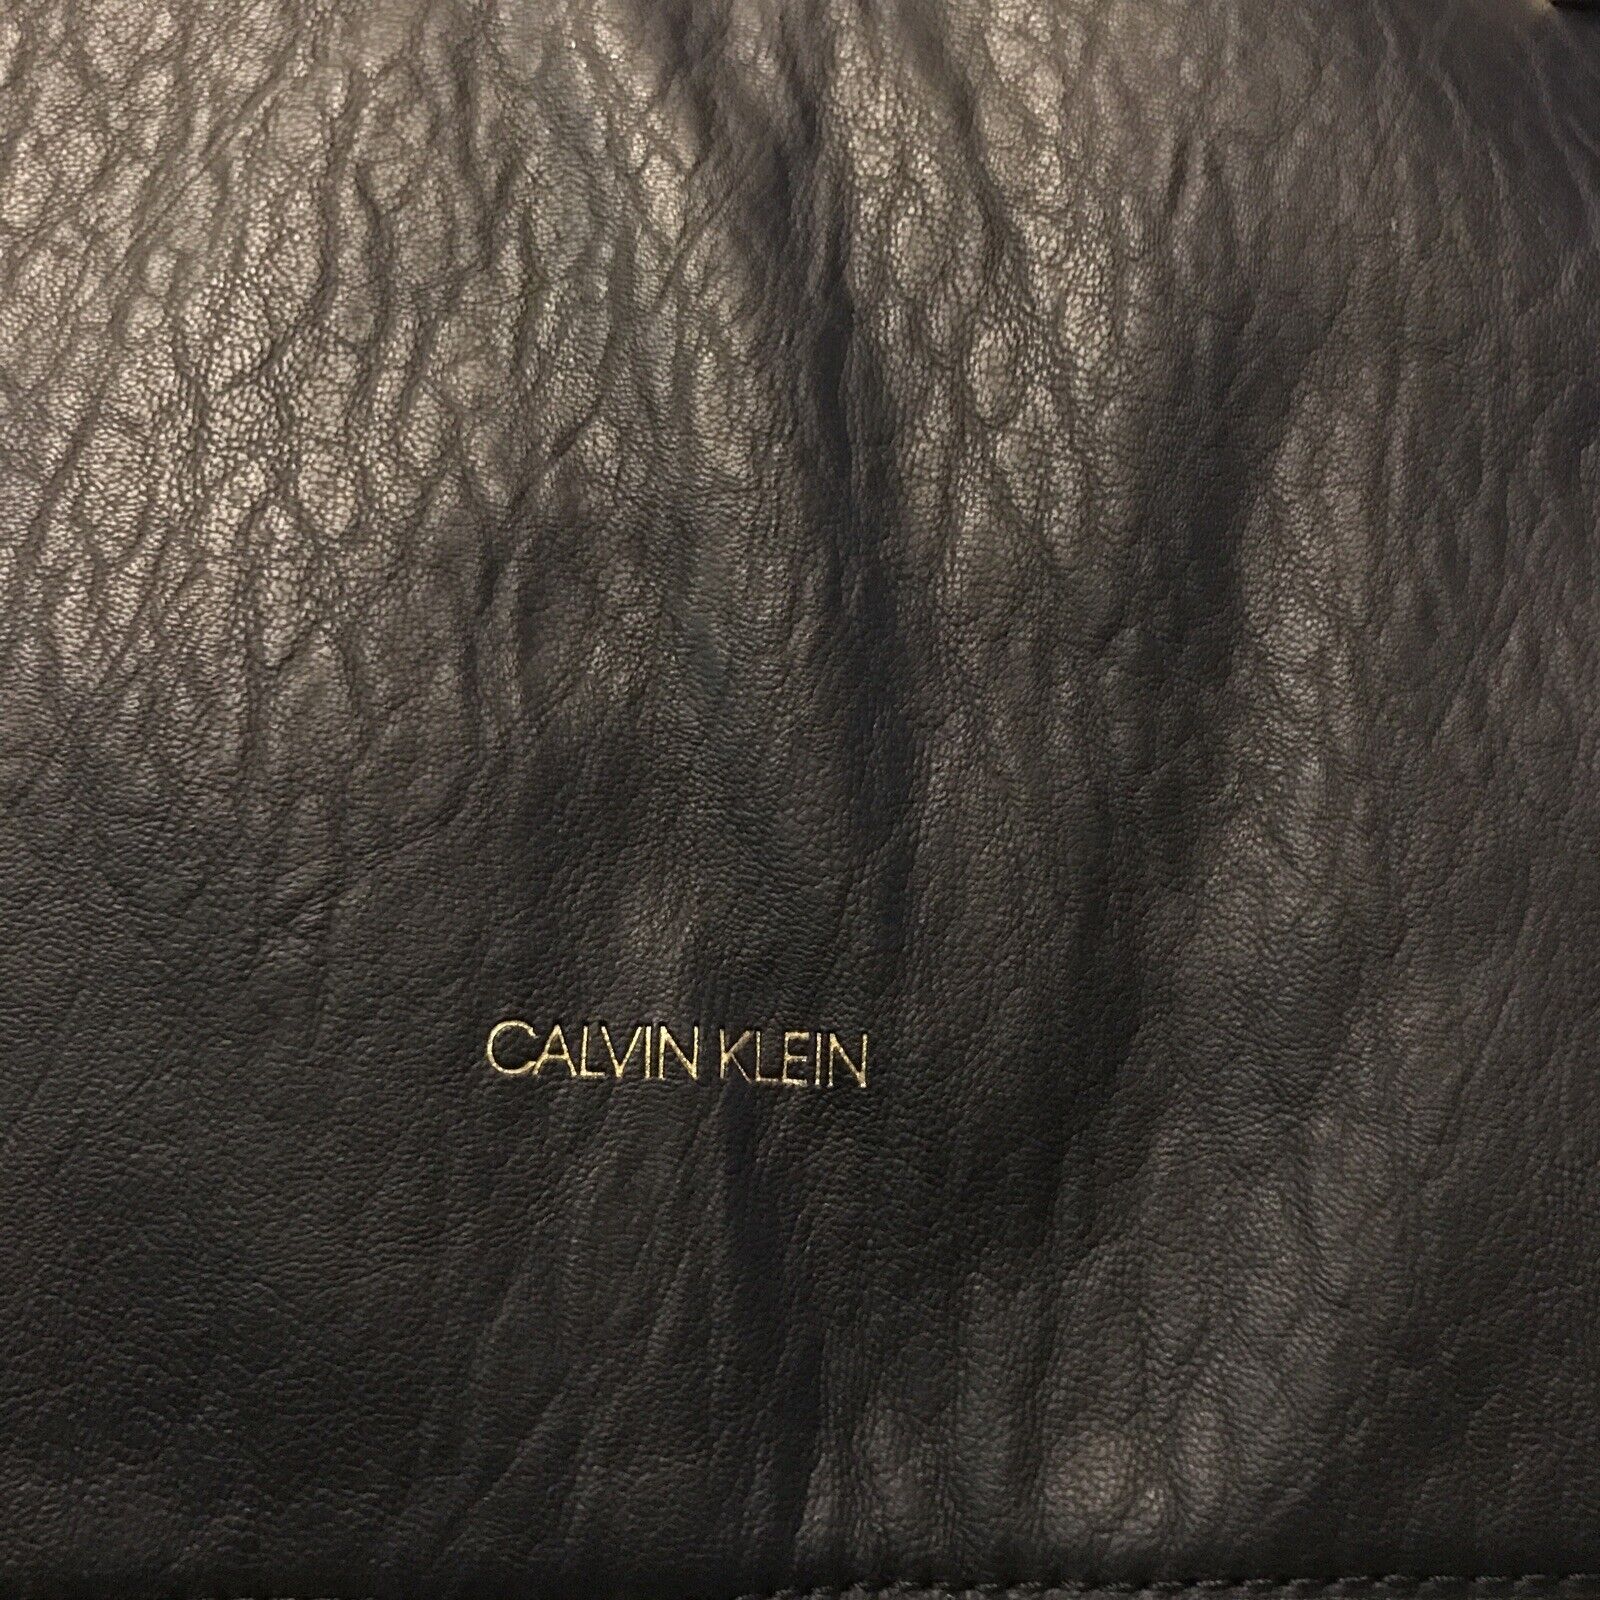 Calvin Klein Gabrianna Novelty Slim Side Zip Leather Tote Black NEW WITH  TAGS 195046017836 | eBay